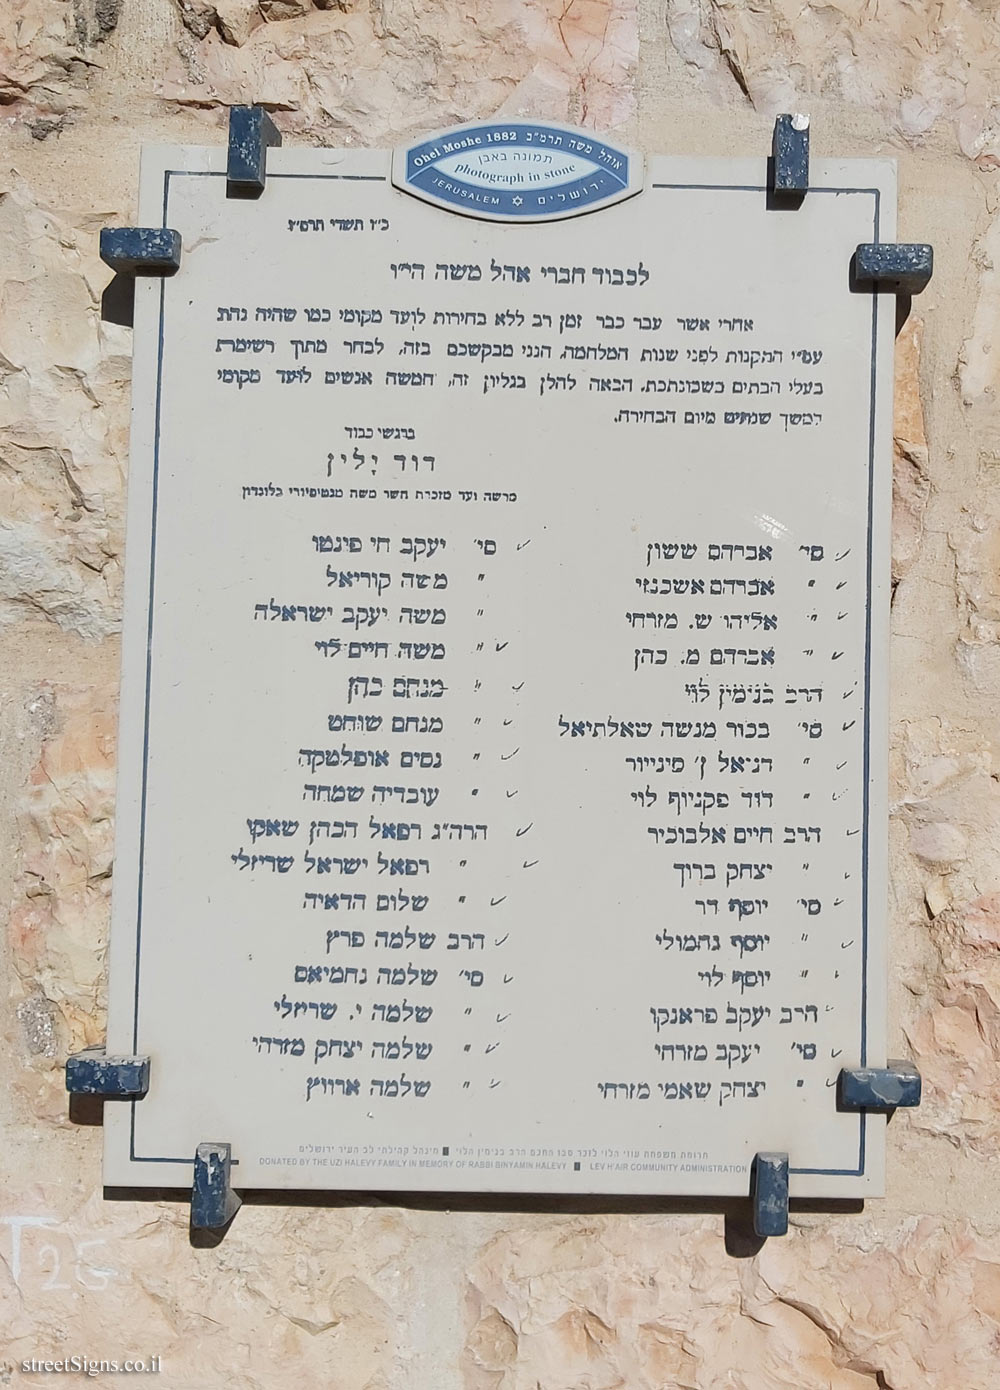 Jerusalem - Photograph in stone - Elections to the Ohel Moshe neighborhood committee - Panel 2